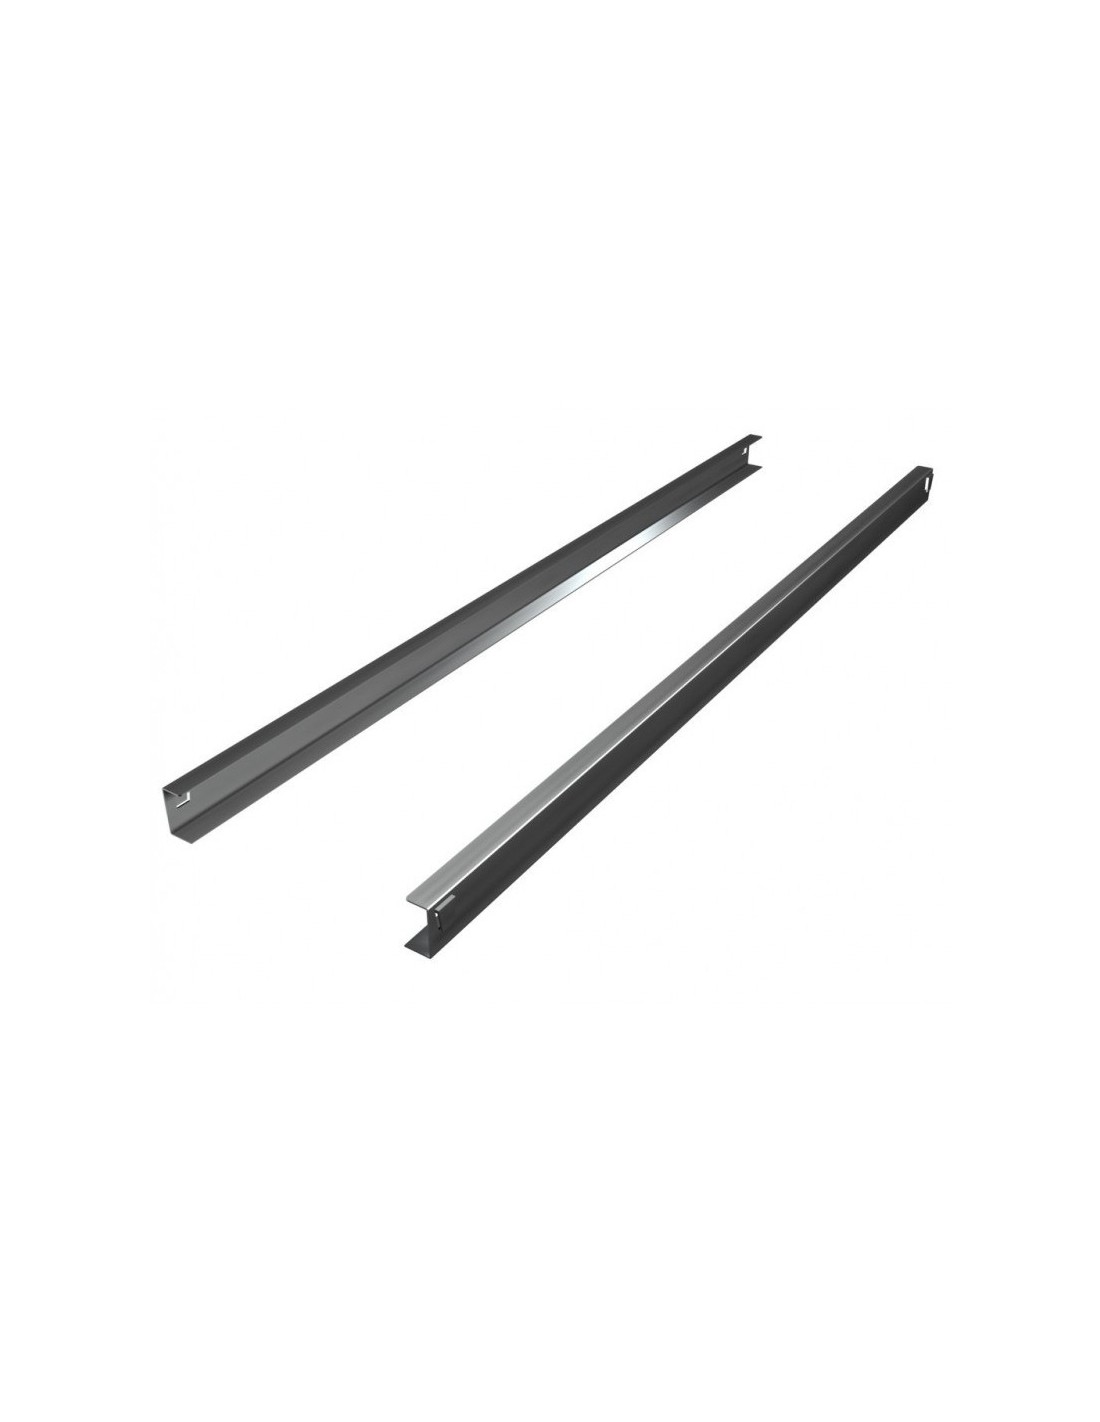 Kit supports and guides for pastry trays 60x40 cm - For GN 650 model